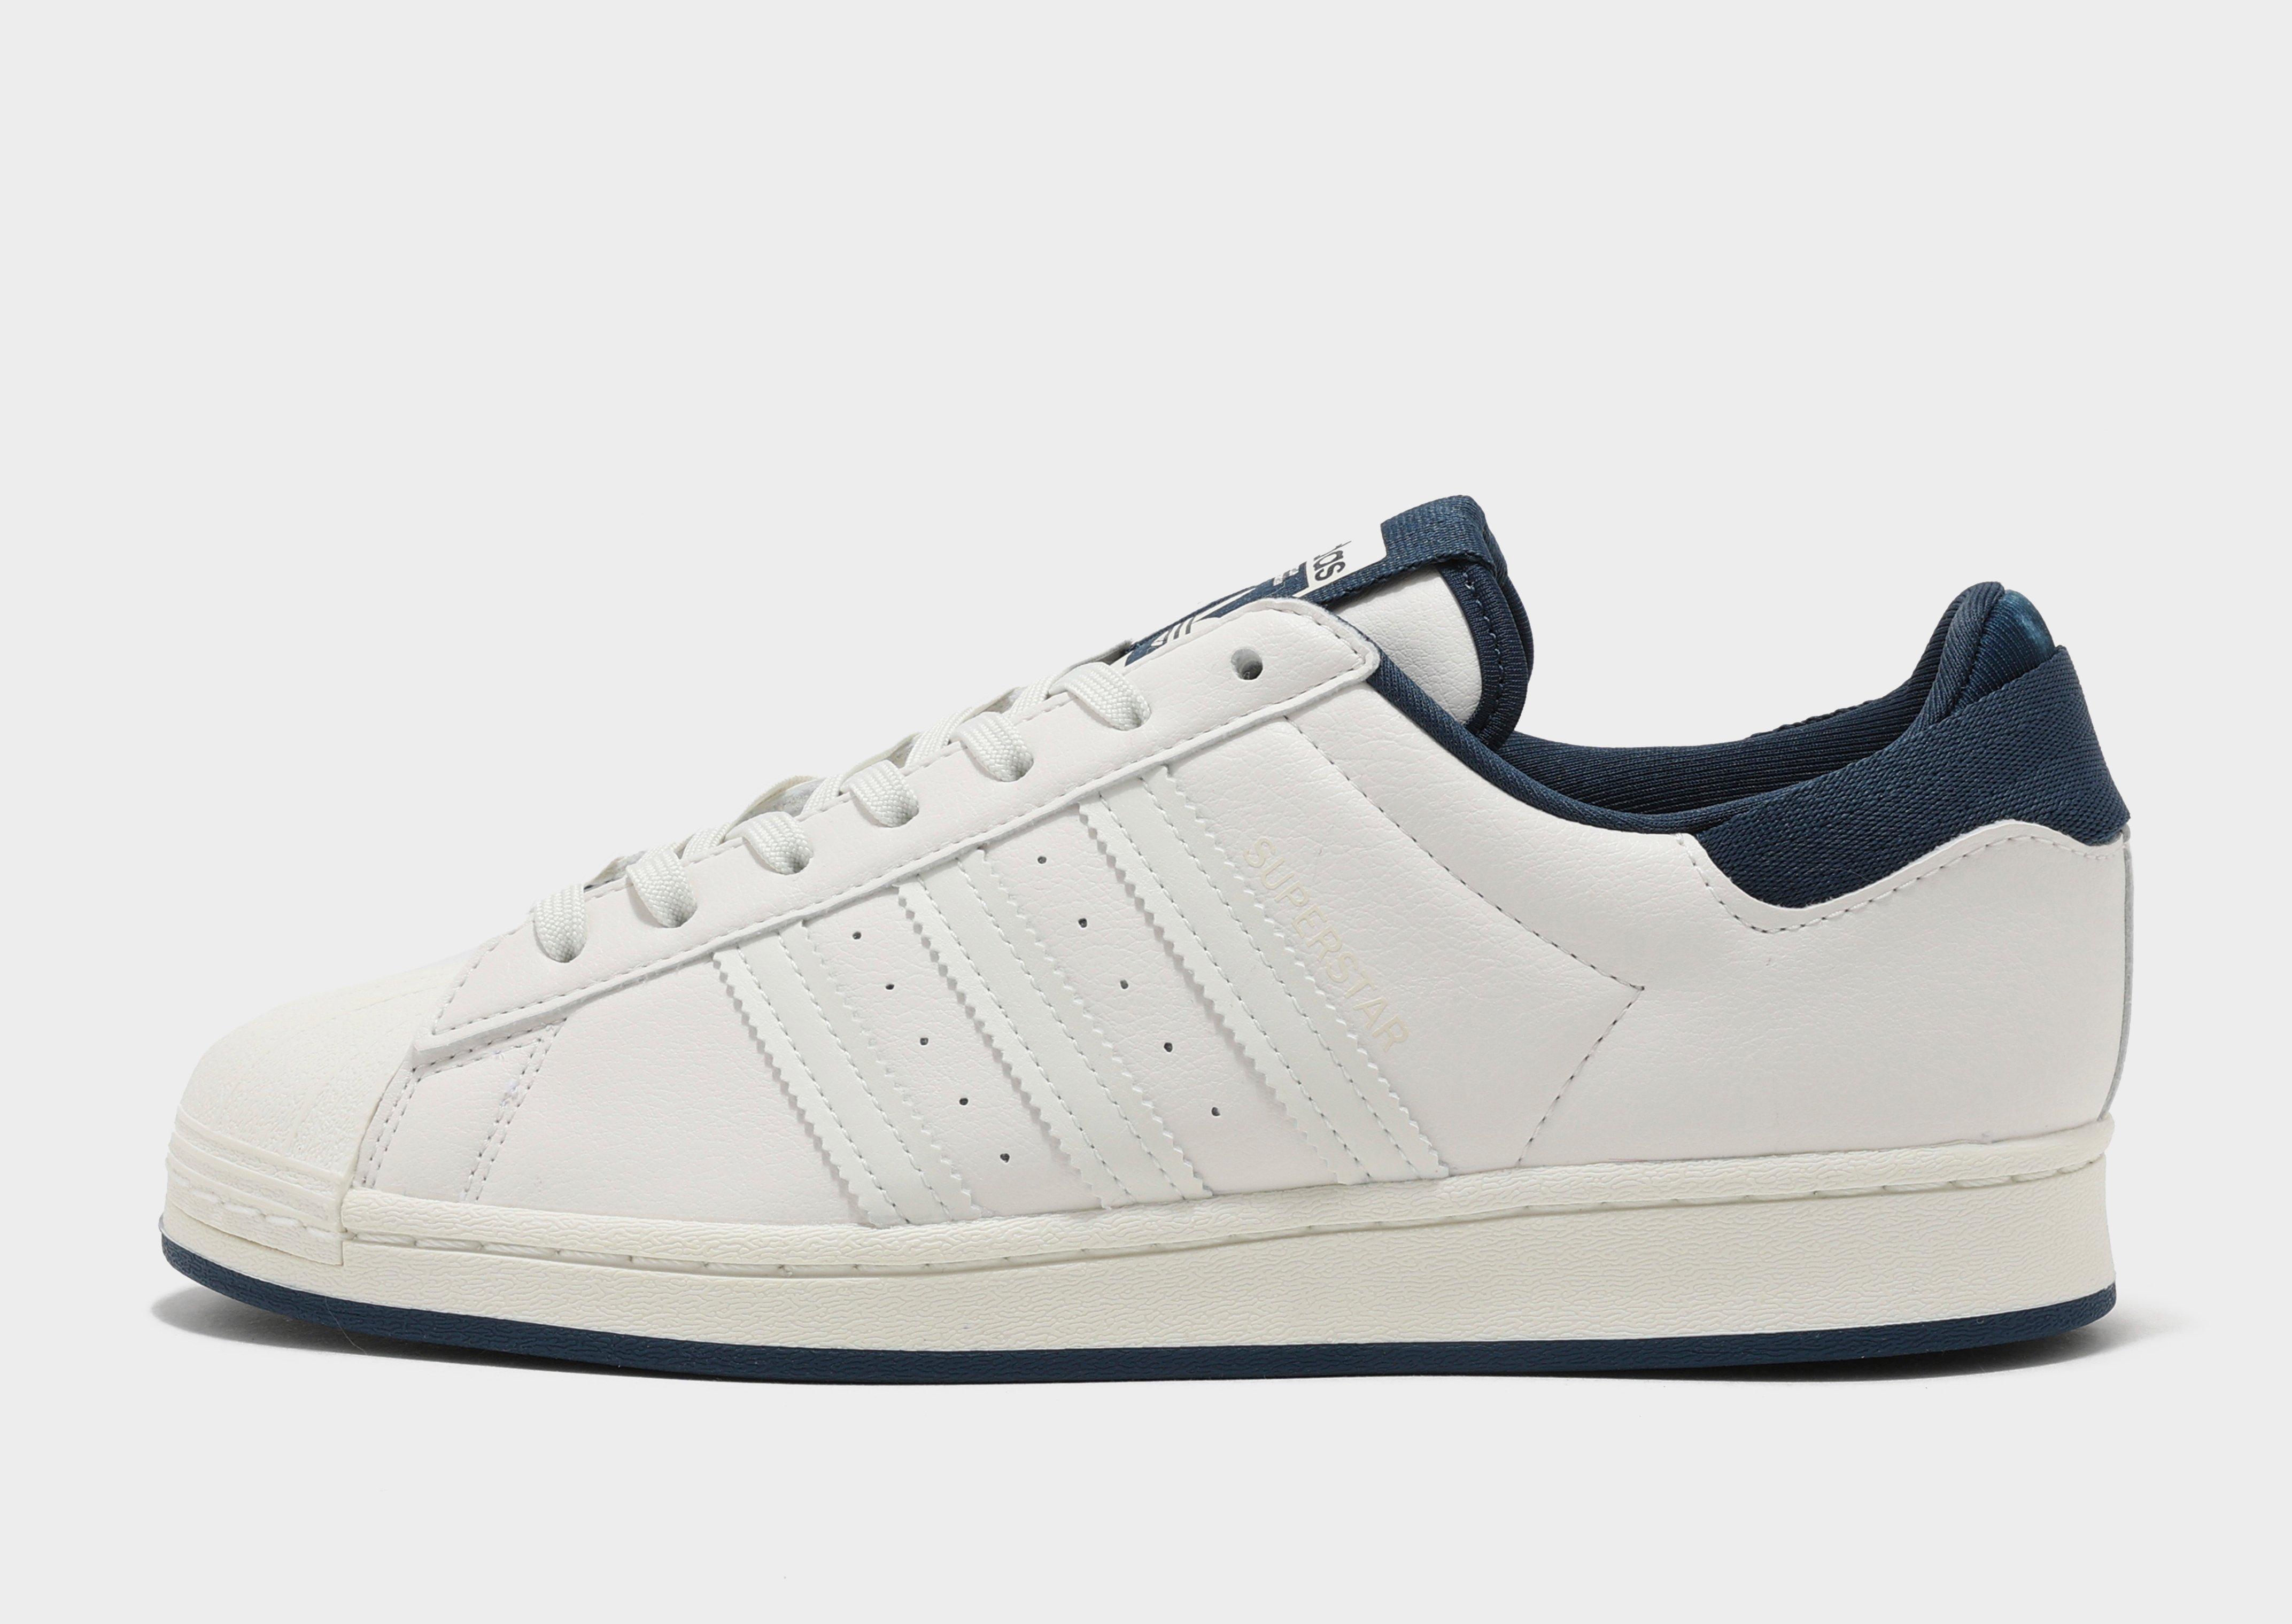 have a finger in the pie Guggenheim Museum Bering Strait adidas Originals Superstar | JD Sports Malaysia